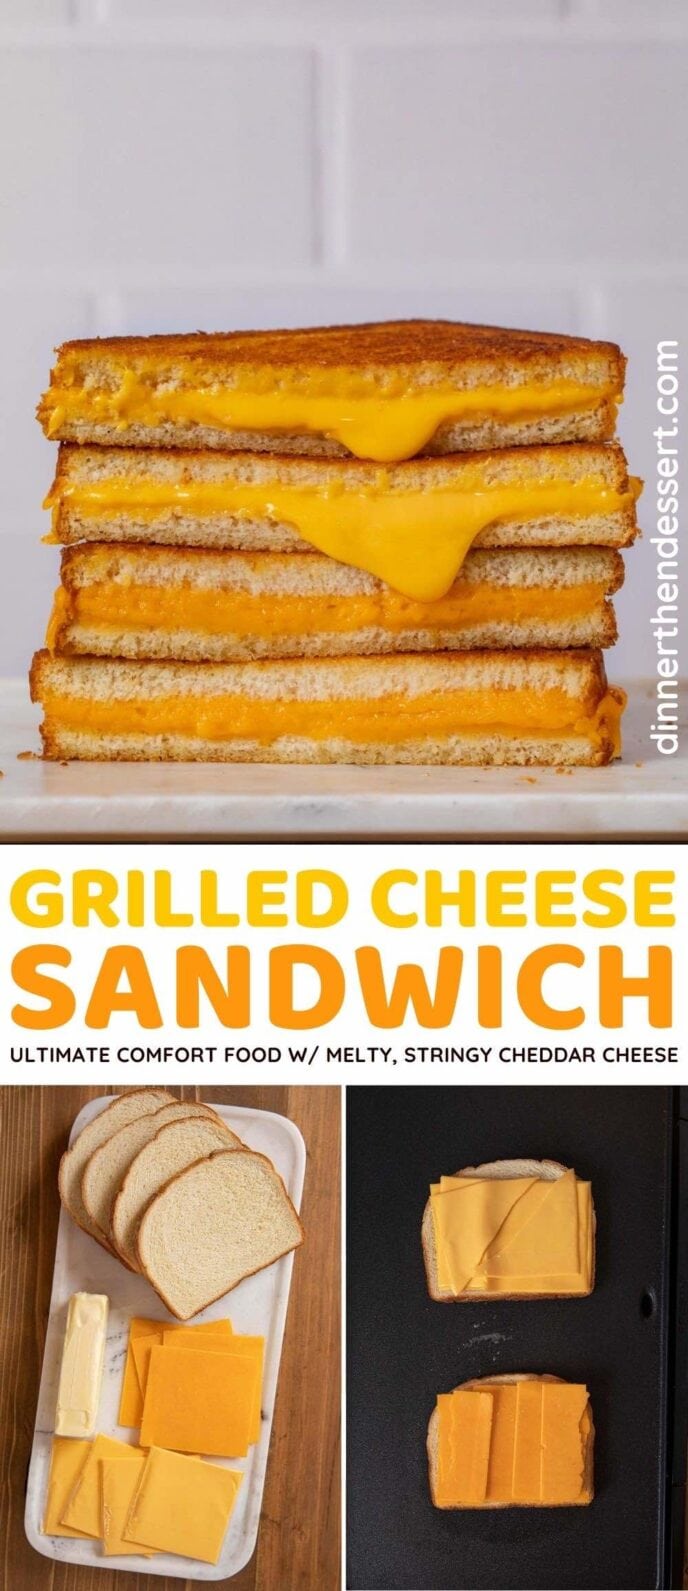 Grilled Cheese Sandwich collage